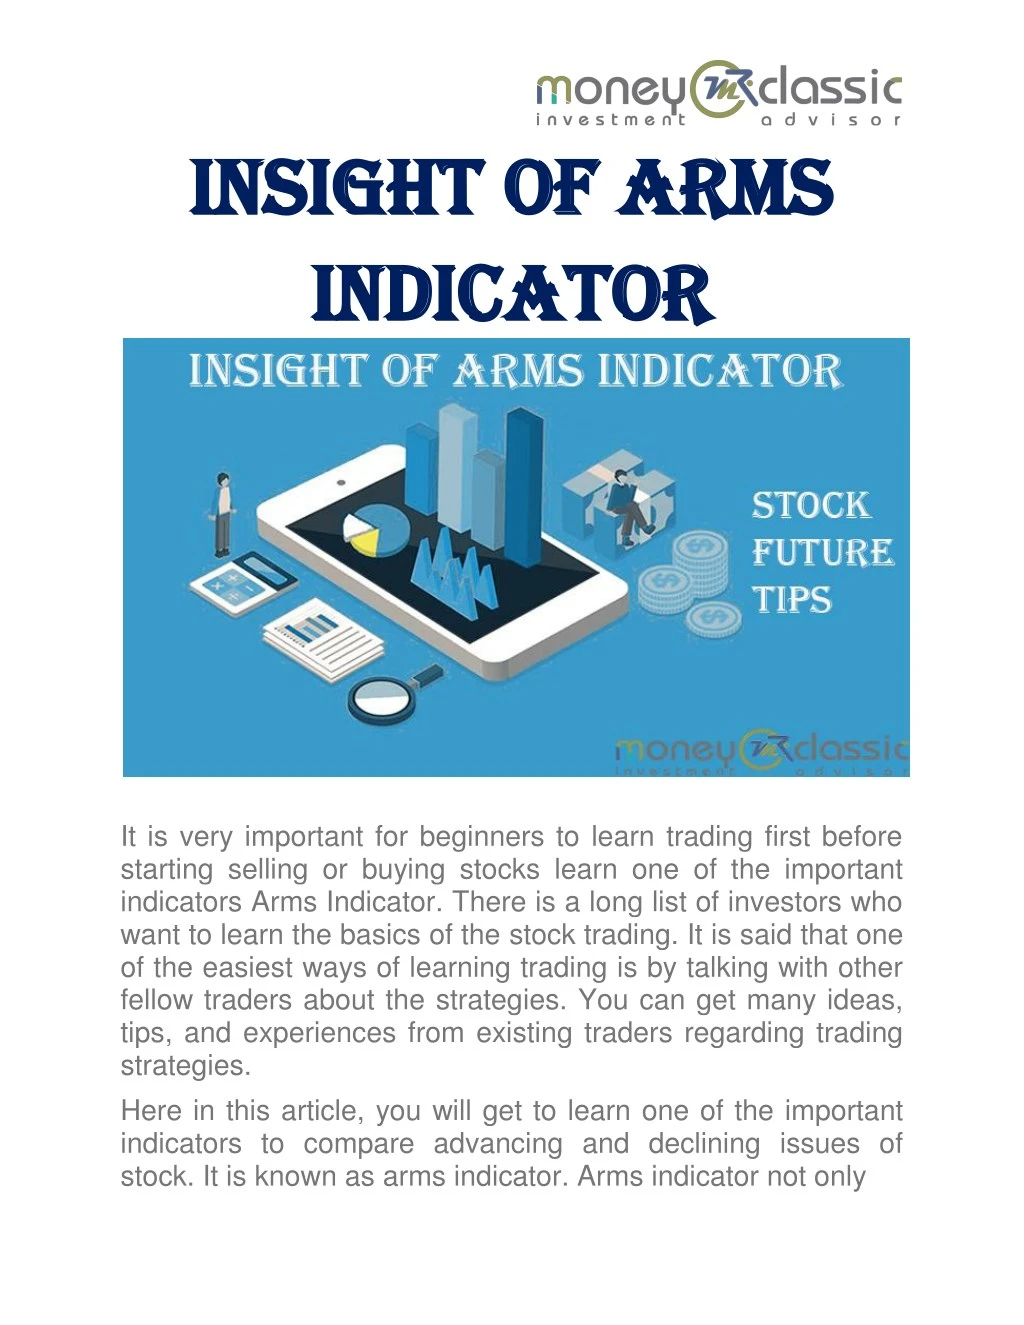 insight of arms insight of arms indicator